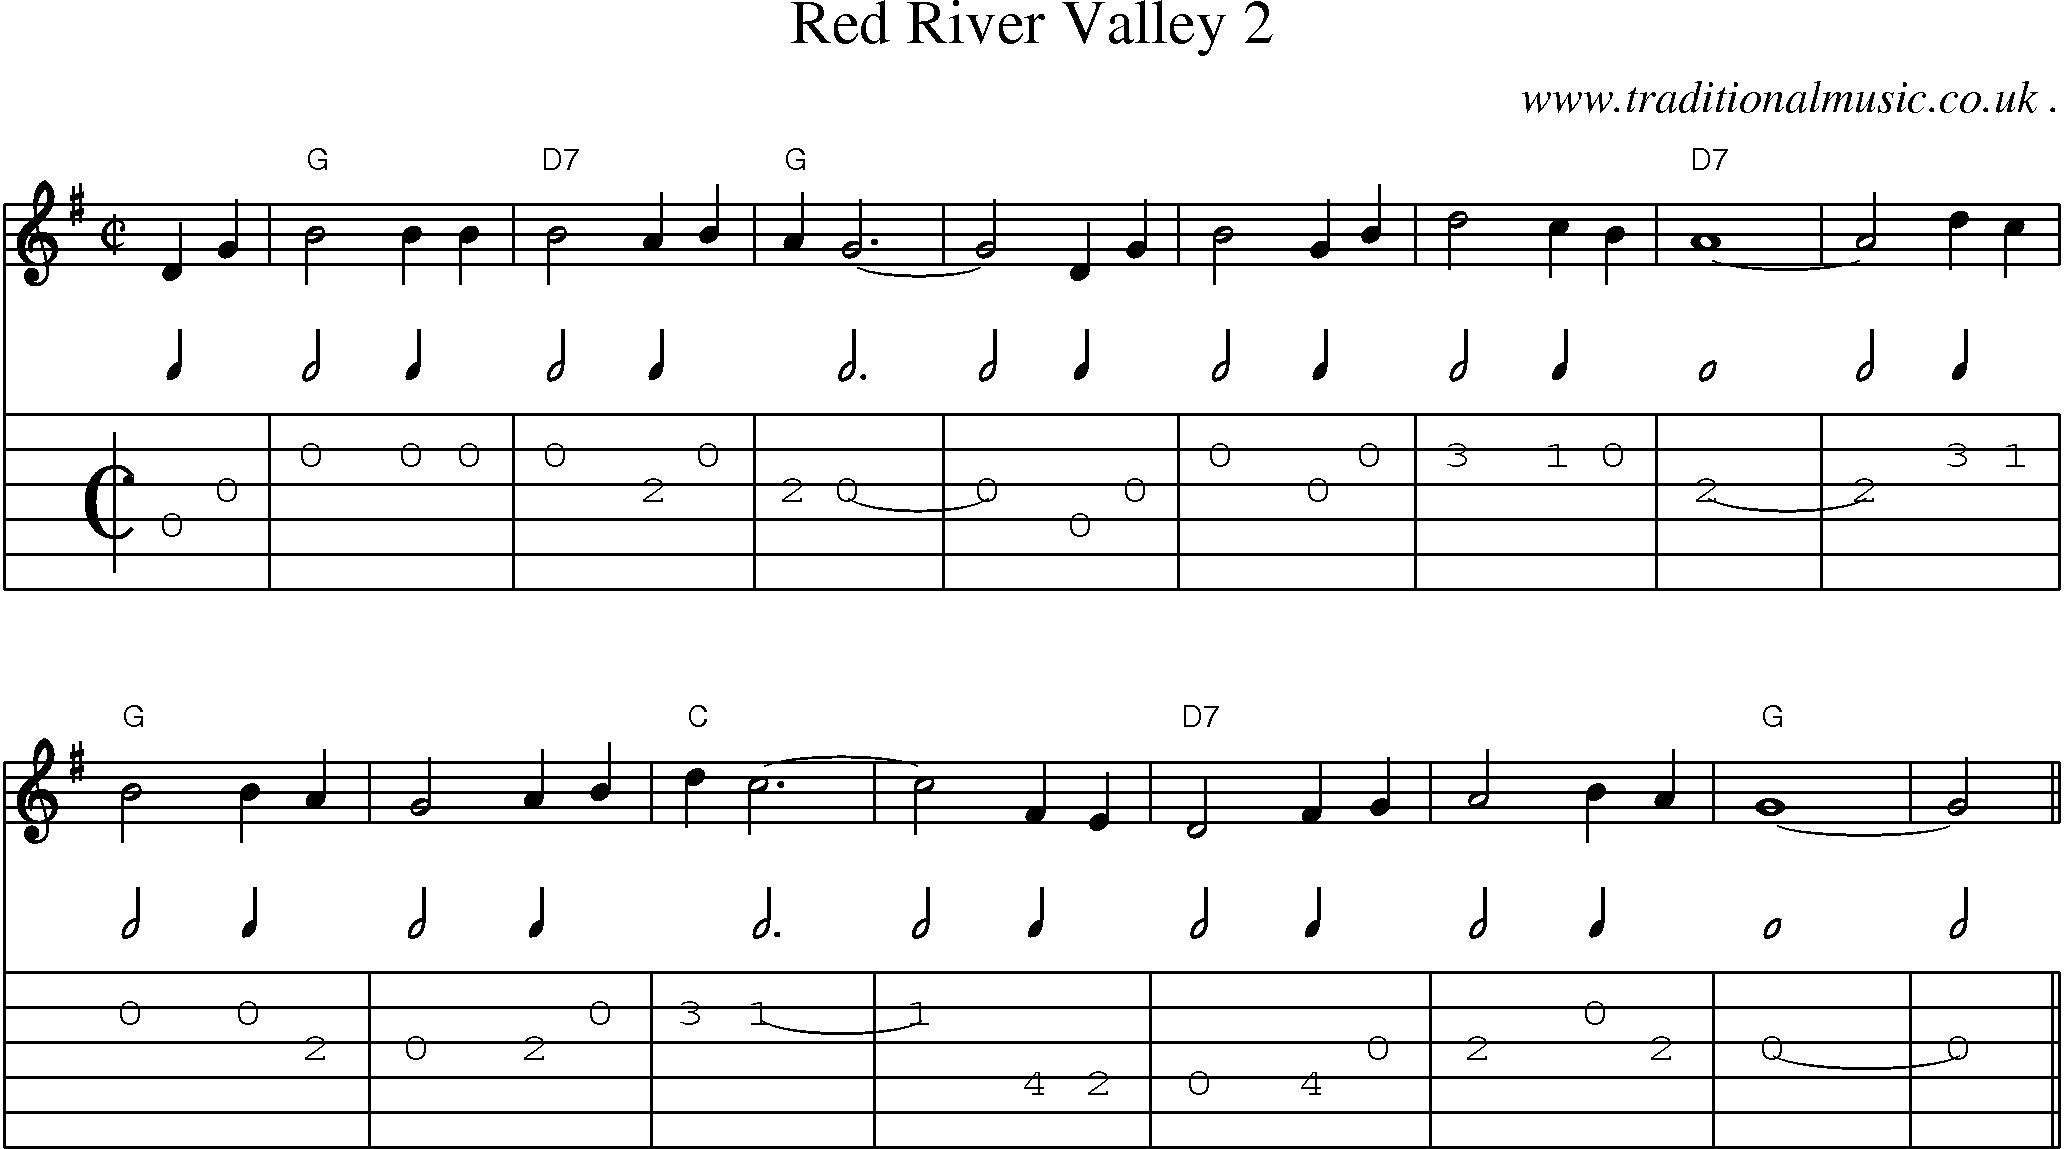 Music Score and Guitar Tabs for Red River Valley 2